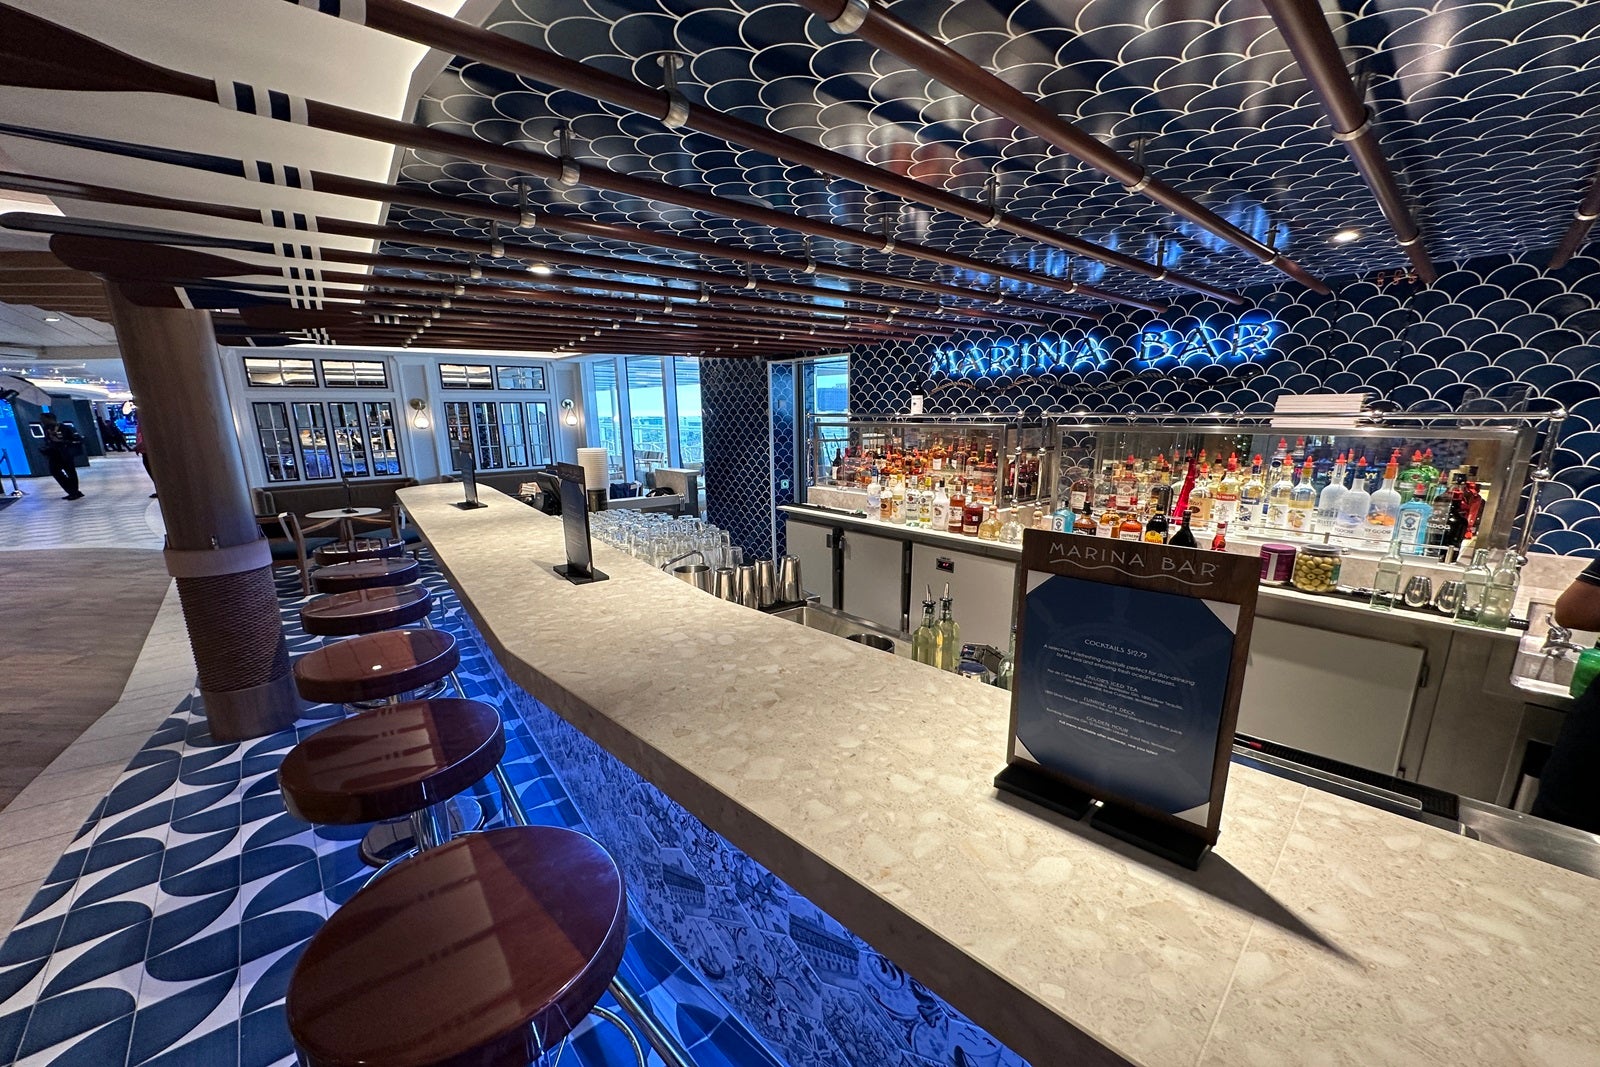 A nautically themed bar with mermaid fish scale tiles on a cruise ship